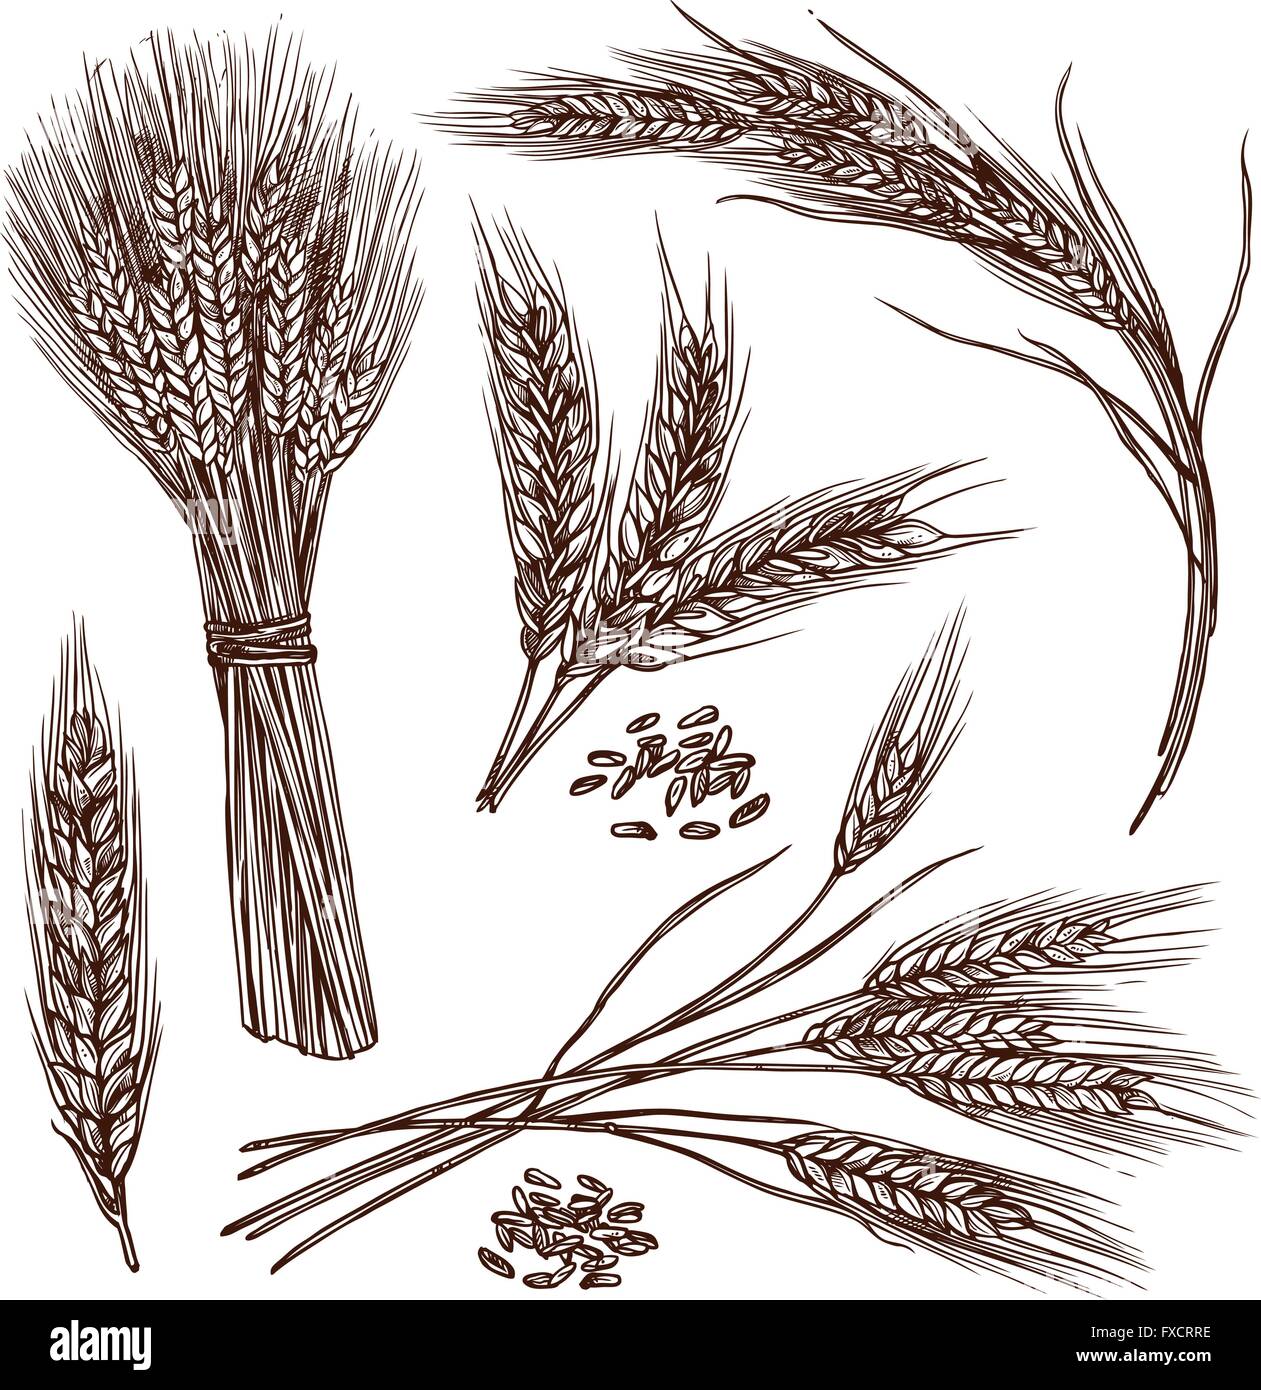 Vector Hand Drawn Wheat Ears Sketch Illustration. Grains and Ears of Wheat.  Black Ear Isolated on White Background. Food Stock Vector - Illustration of  bakery, kitchen: 227886304